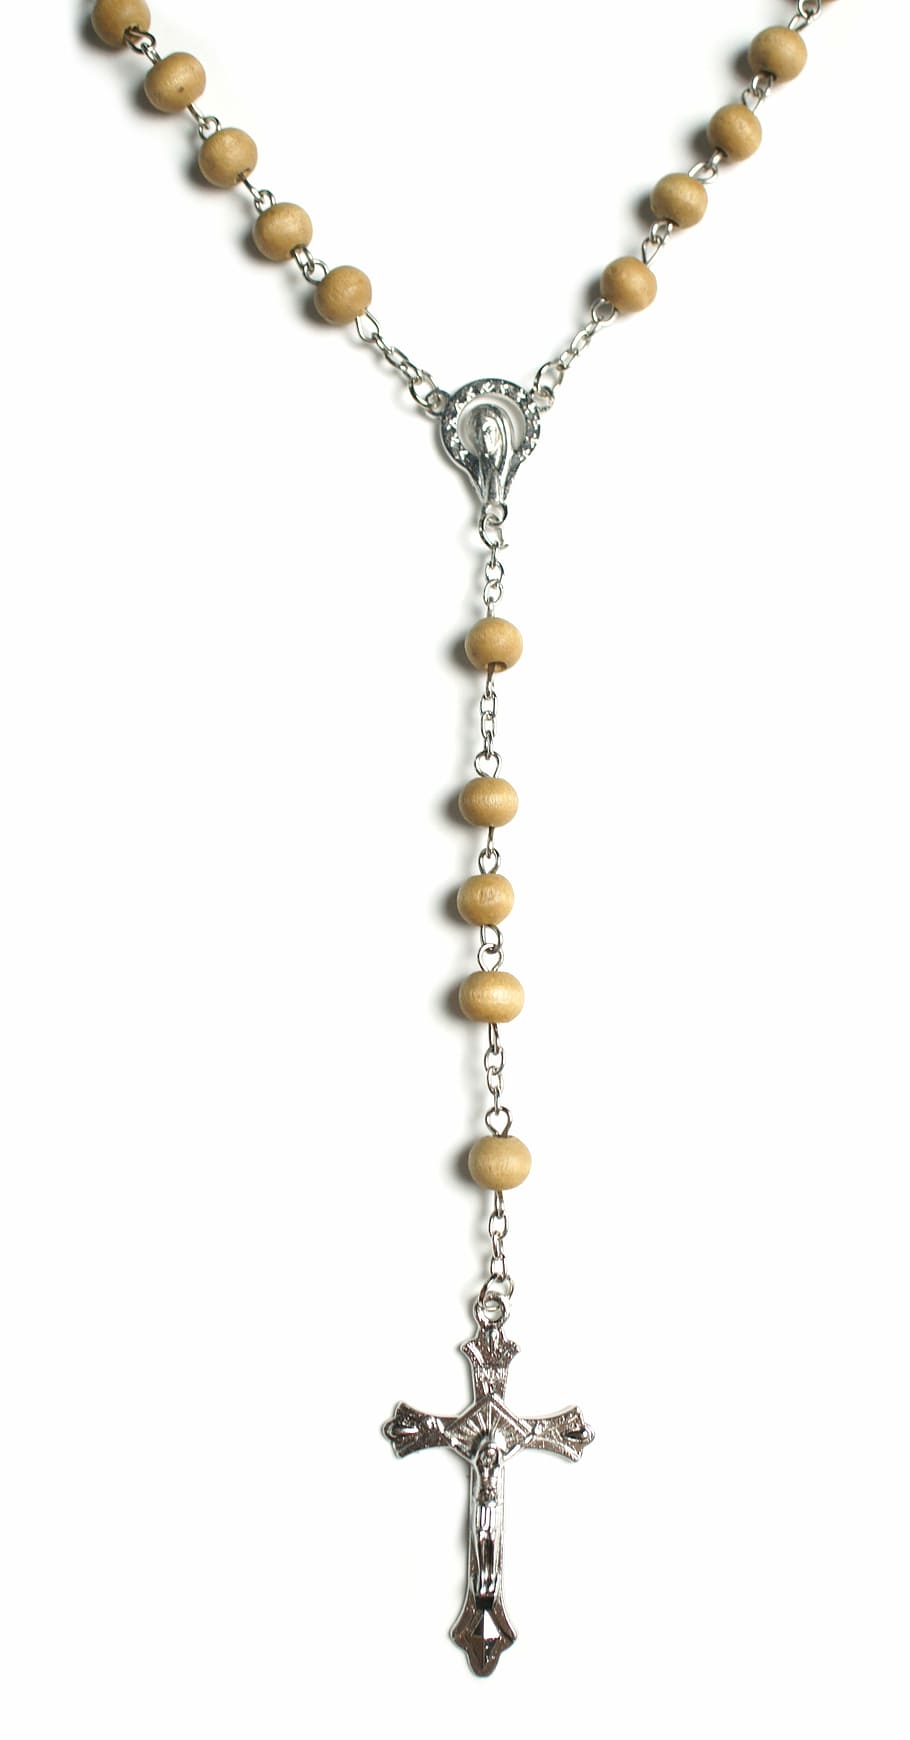 closeup photo of beaded brown silver-colored rosary, wooden rosary